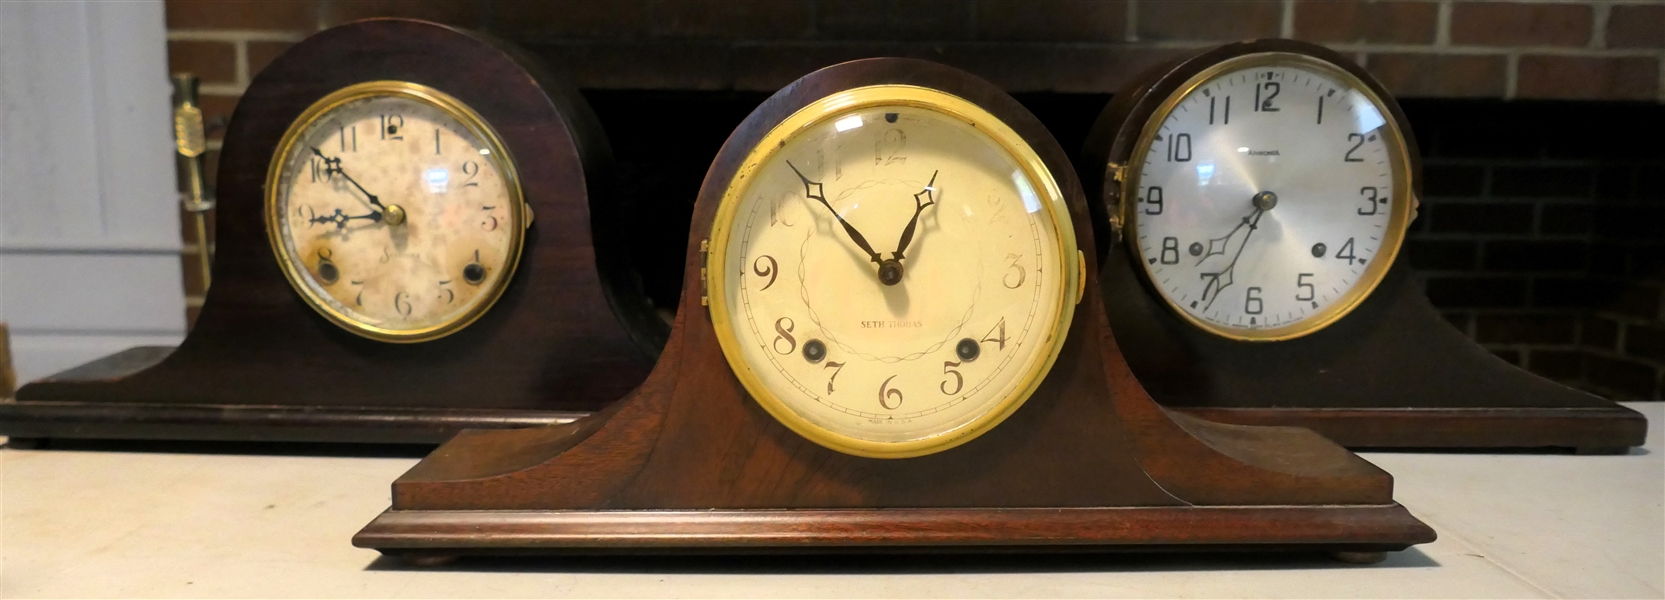 3 Onion Head Mantle Clocks - Sessions, Seth Thomas, and Ansonia - Sessions Measures 9 1/2" Tall 19" Long - Ansonia Glass Face Needs Attaching - No Keys or Pendulums 